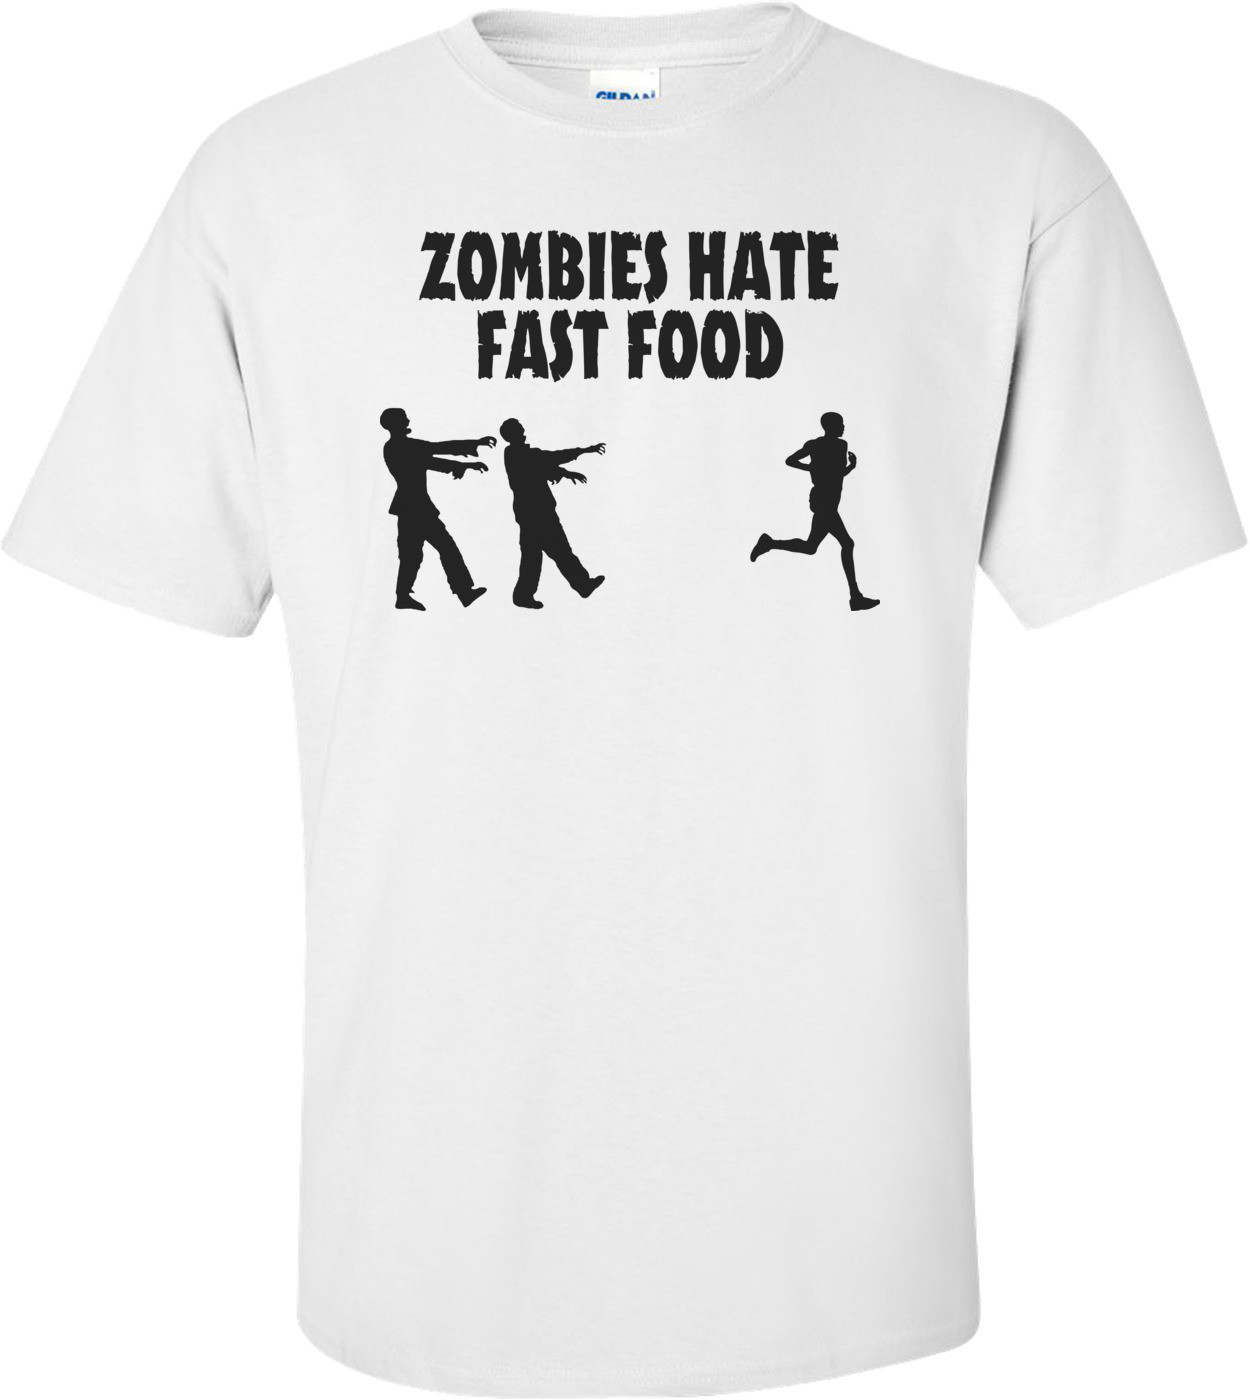 Zombies Hate Fast Food Funny T-shirt